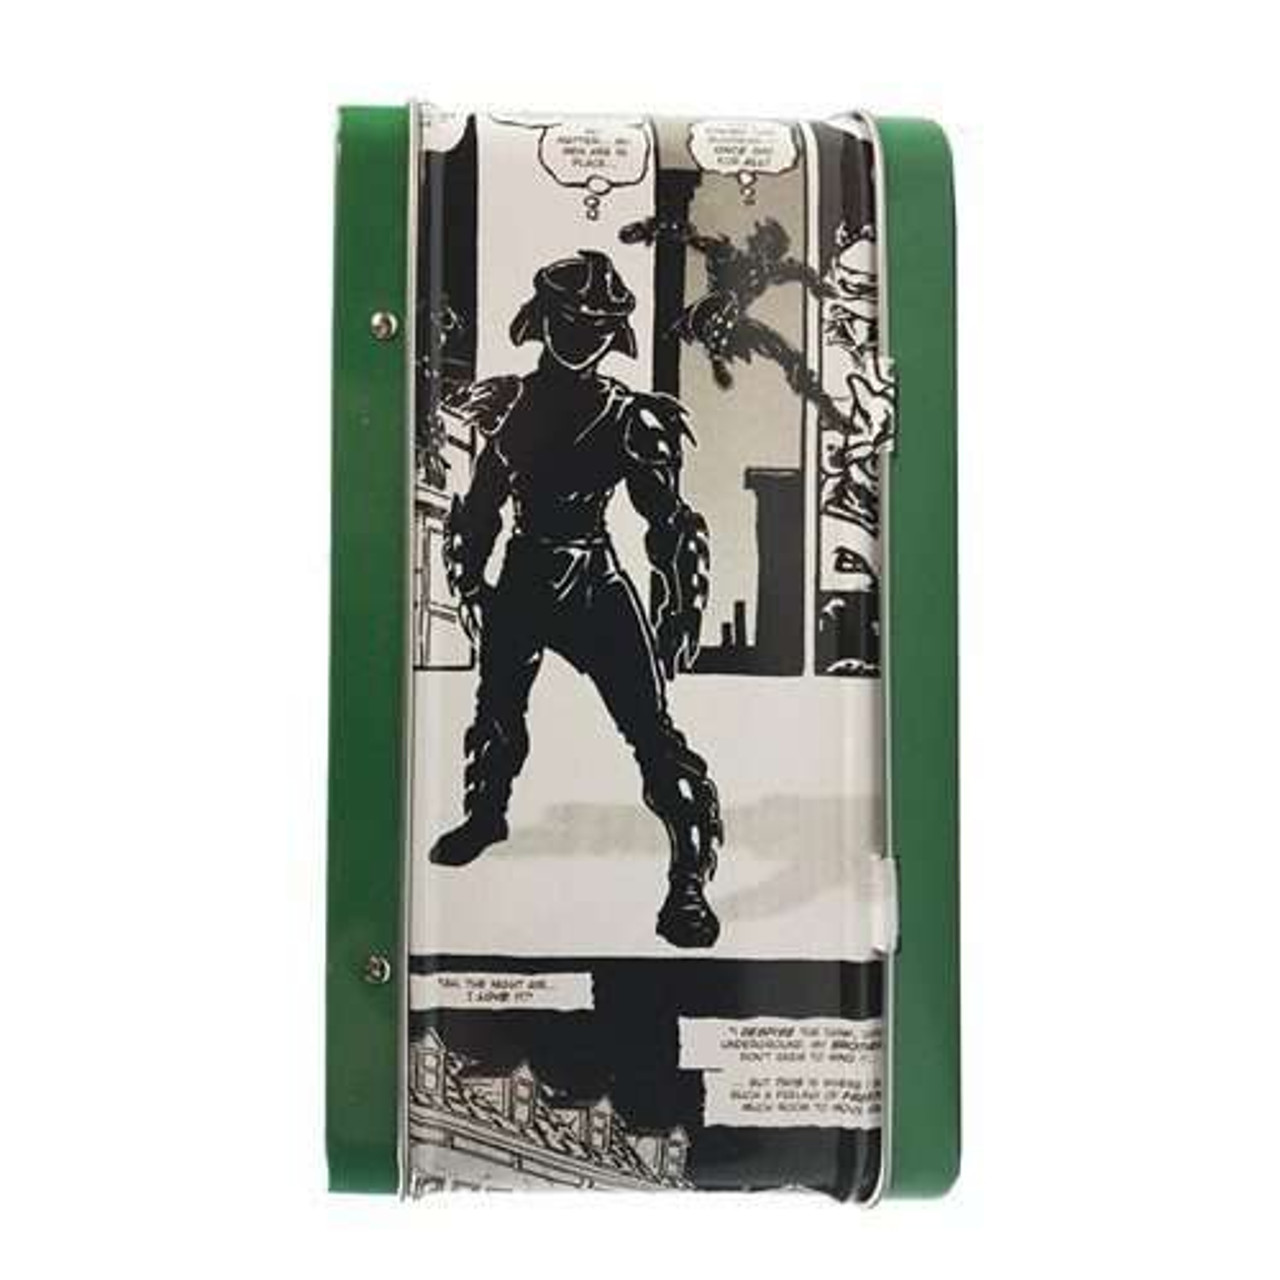 https://cdn11.bigcommerce.com/s-8j9ytfqbd1/images/stencil/1280x1280/products/384/5565/TMNT-Classic-Comic-1-Lunchbox-with-Thermos-Previews-Exclusive-PX_1205__34665.1687285352.jpg?c=1?imbypass=on